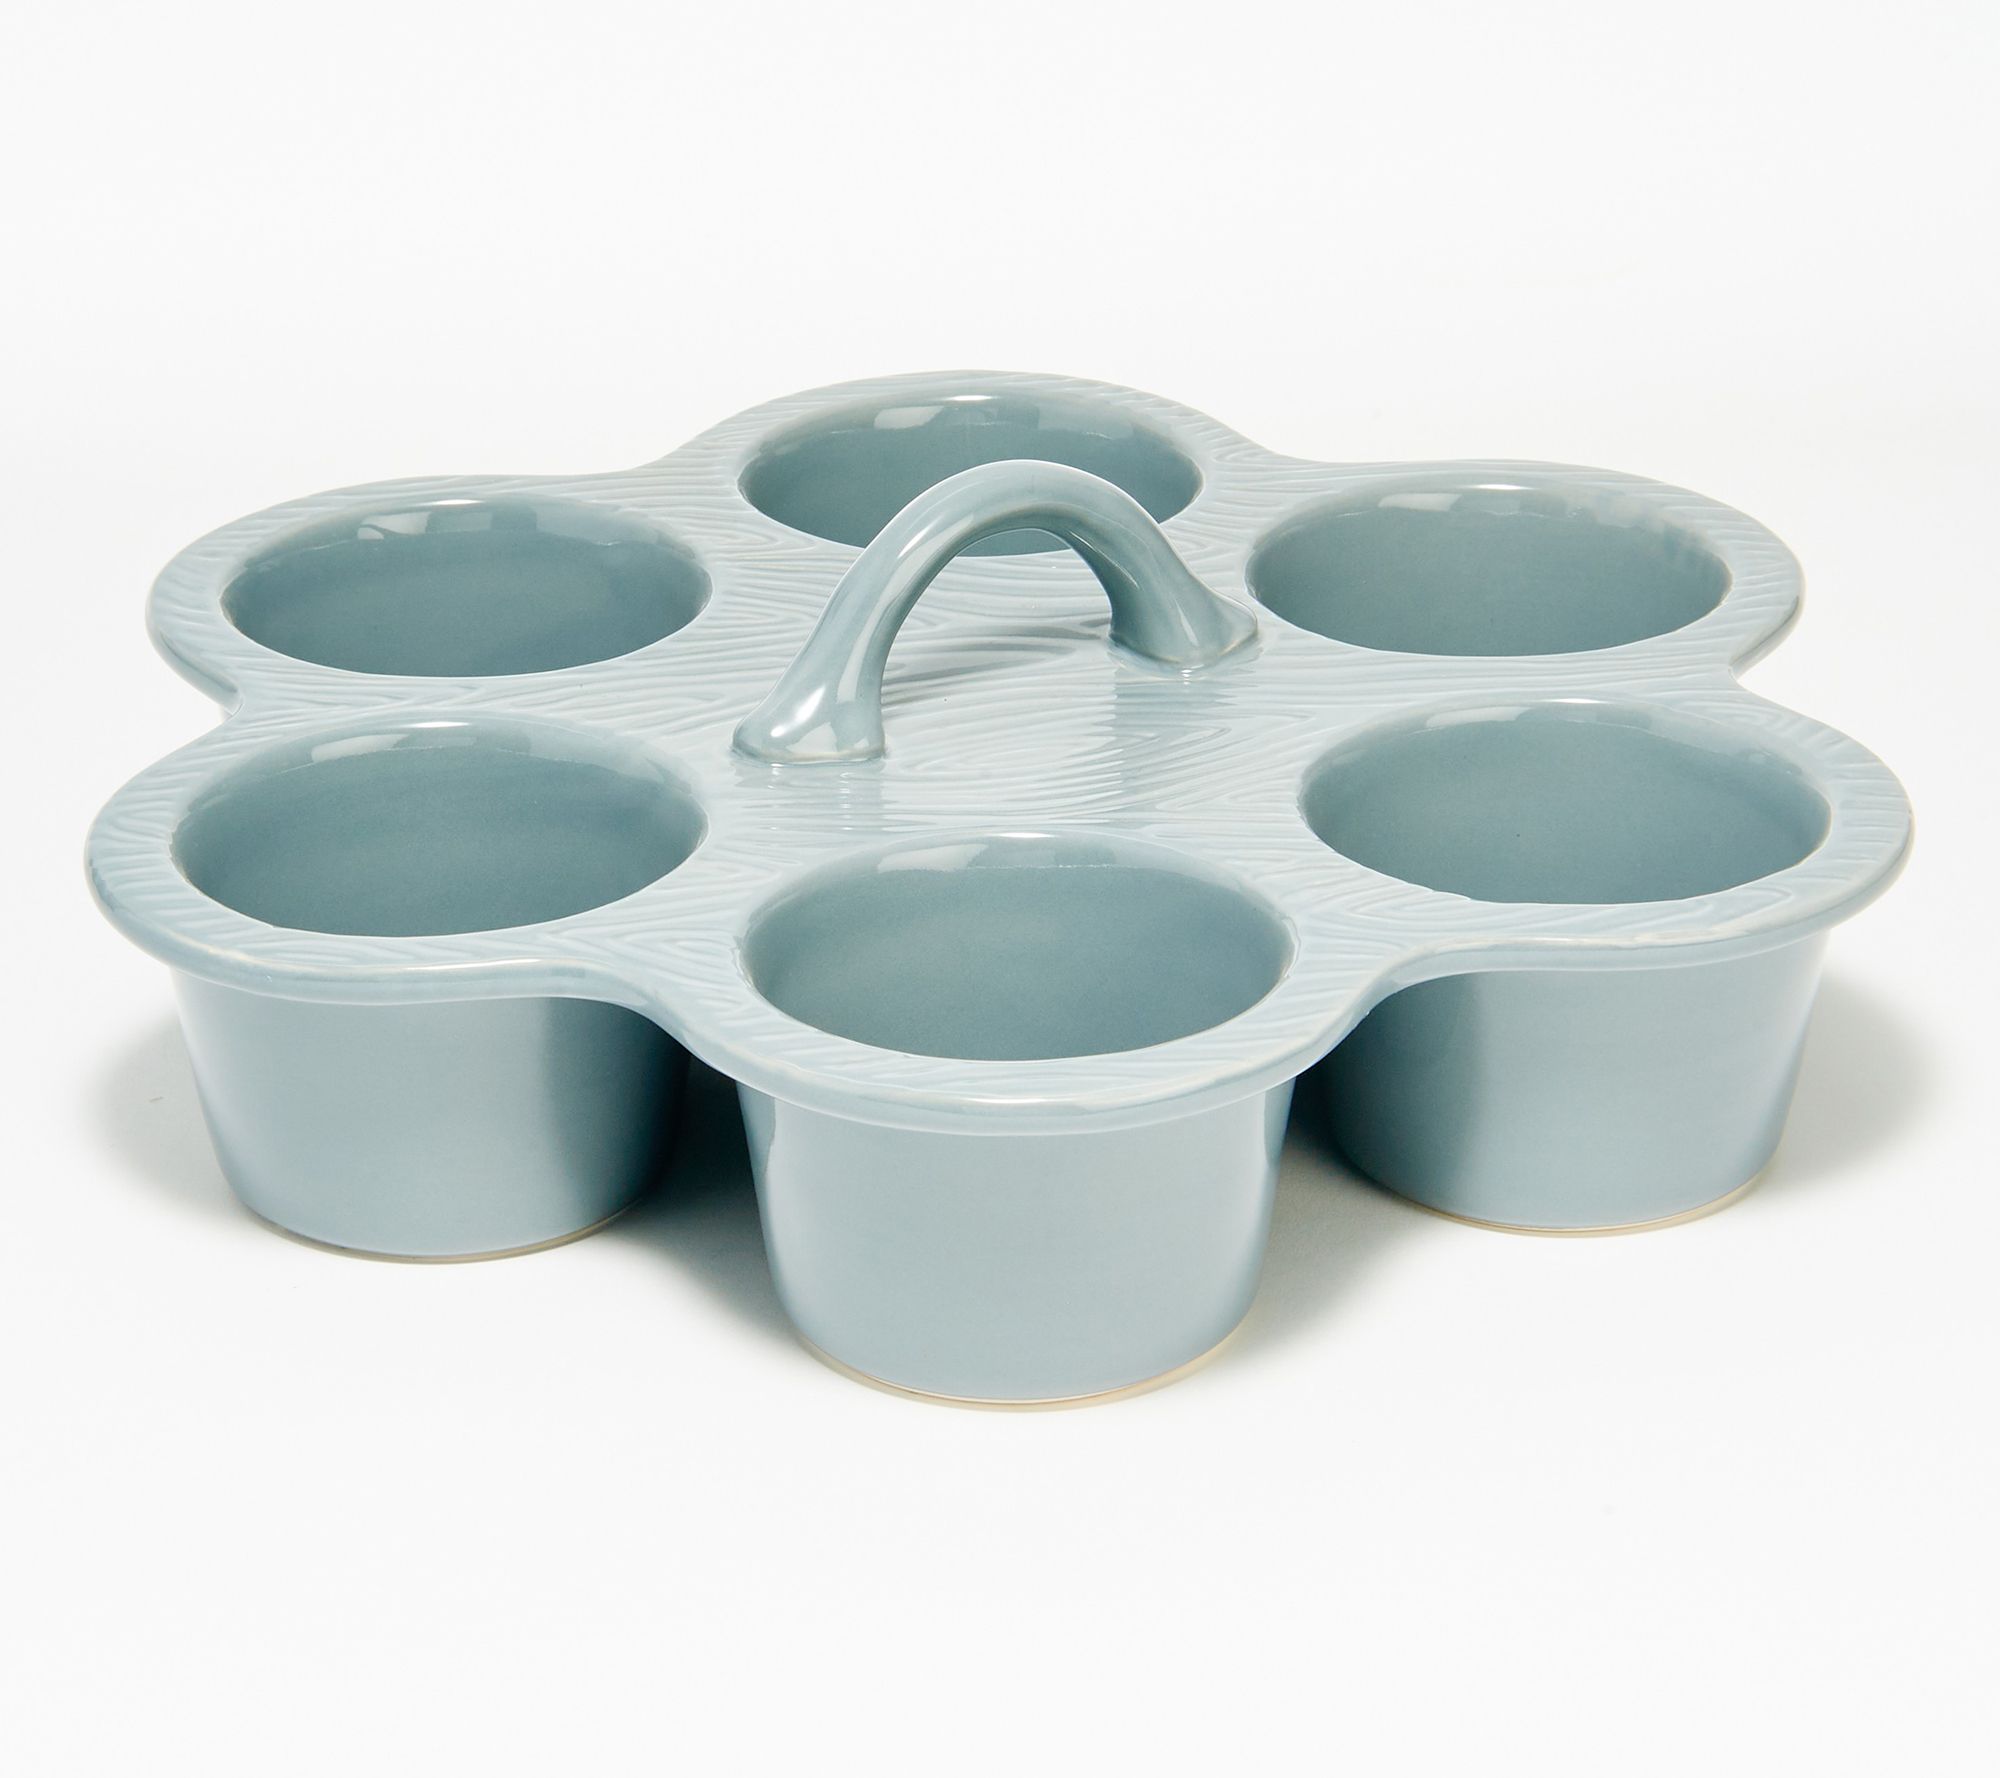 Temp-tations Woodland 6-Cup Texas Muffin Pan with Handle Blue